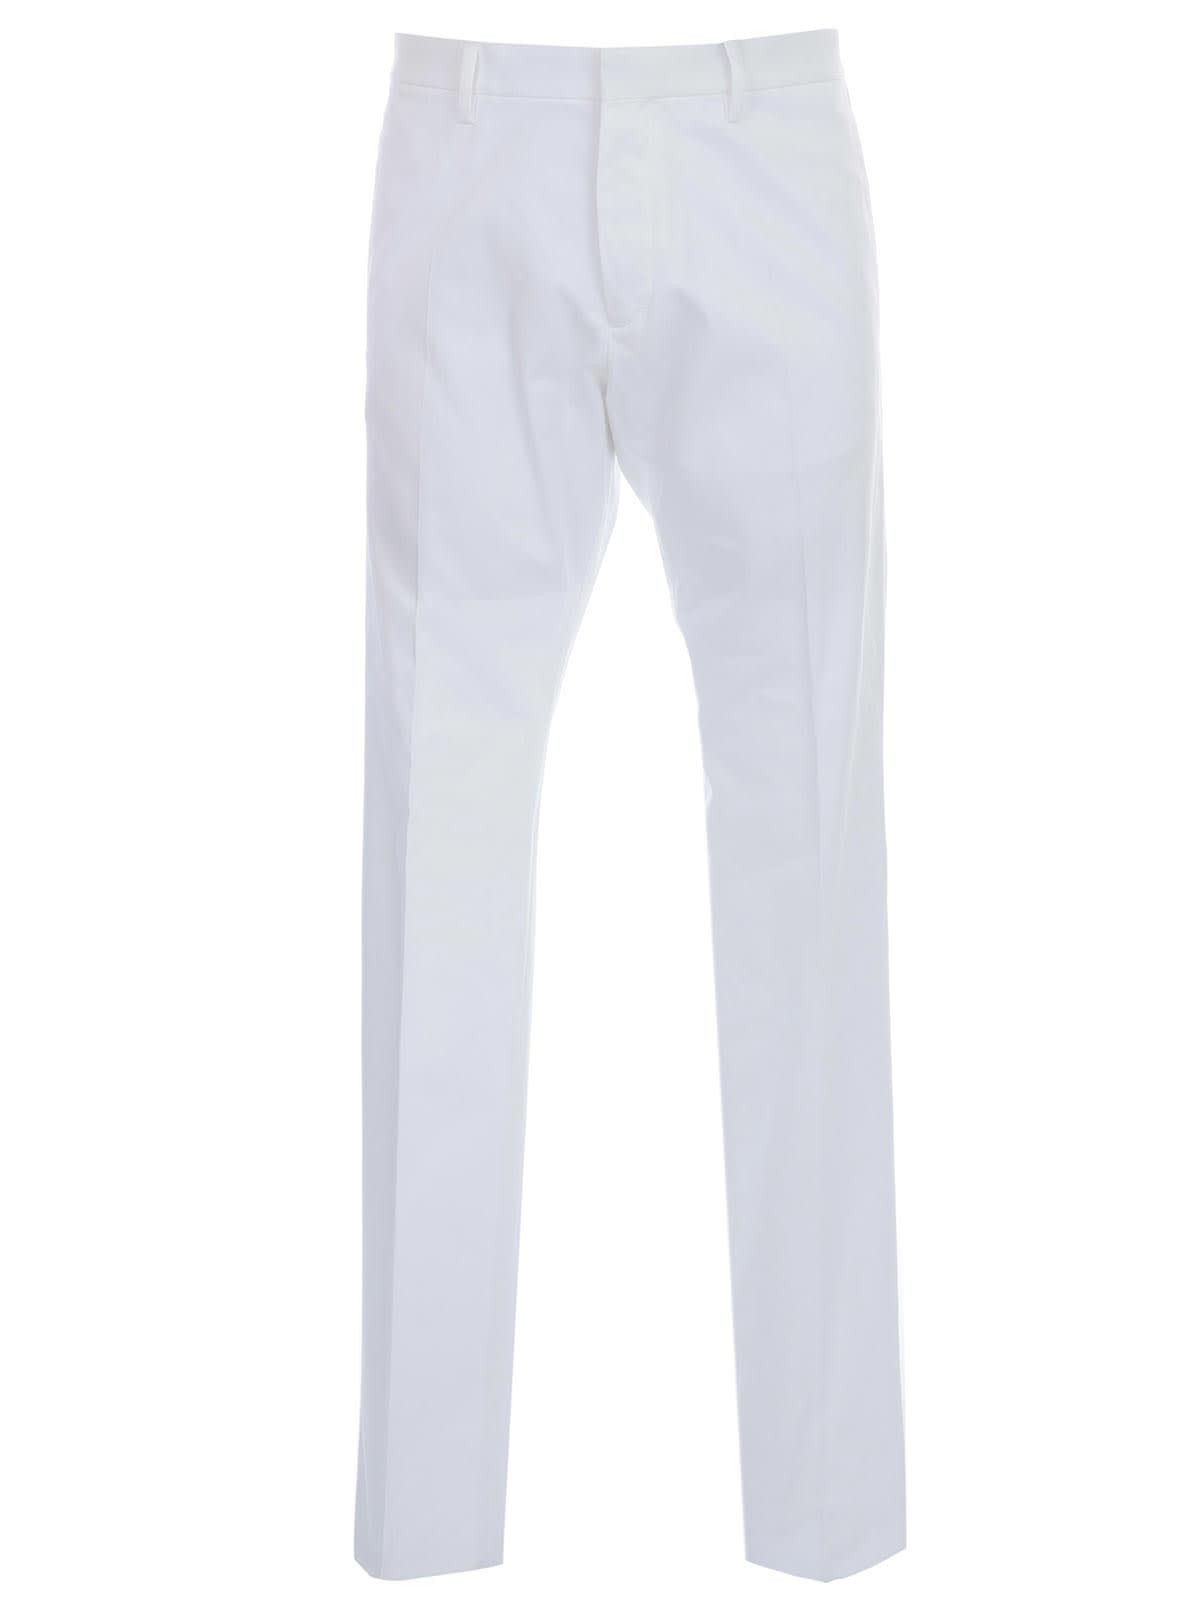 DSQUARED2 trousers COOL GUY FIT COTTON,11248320